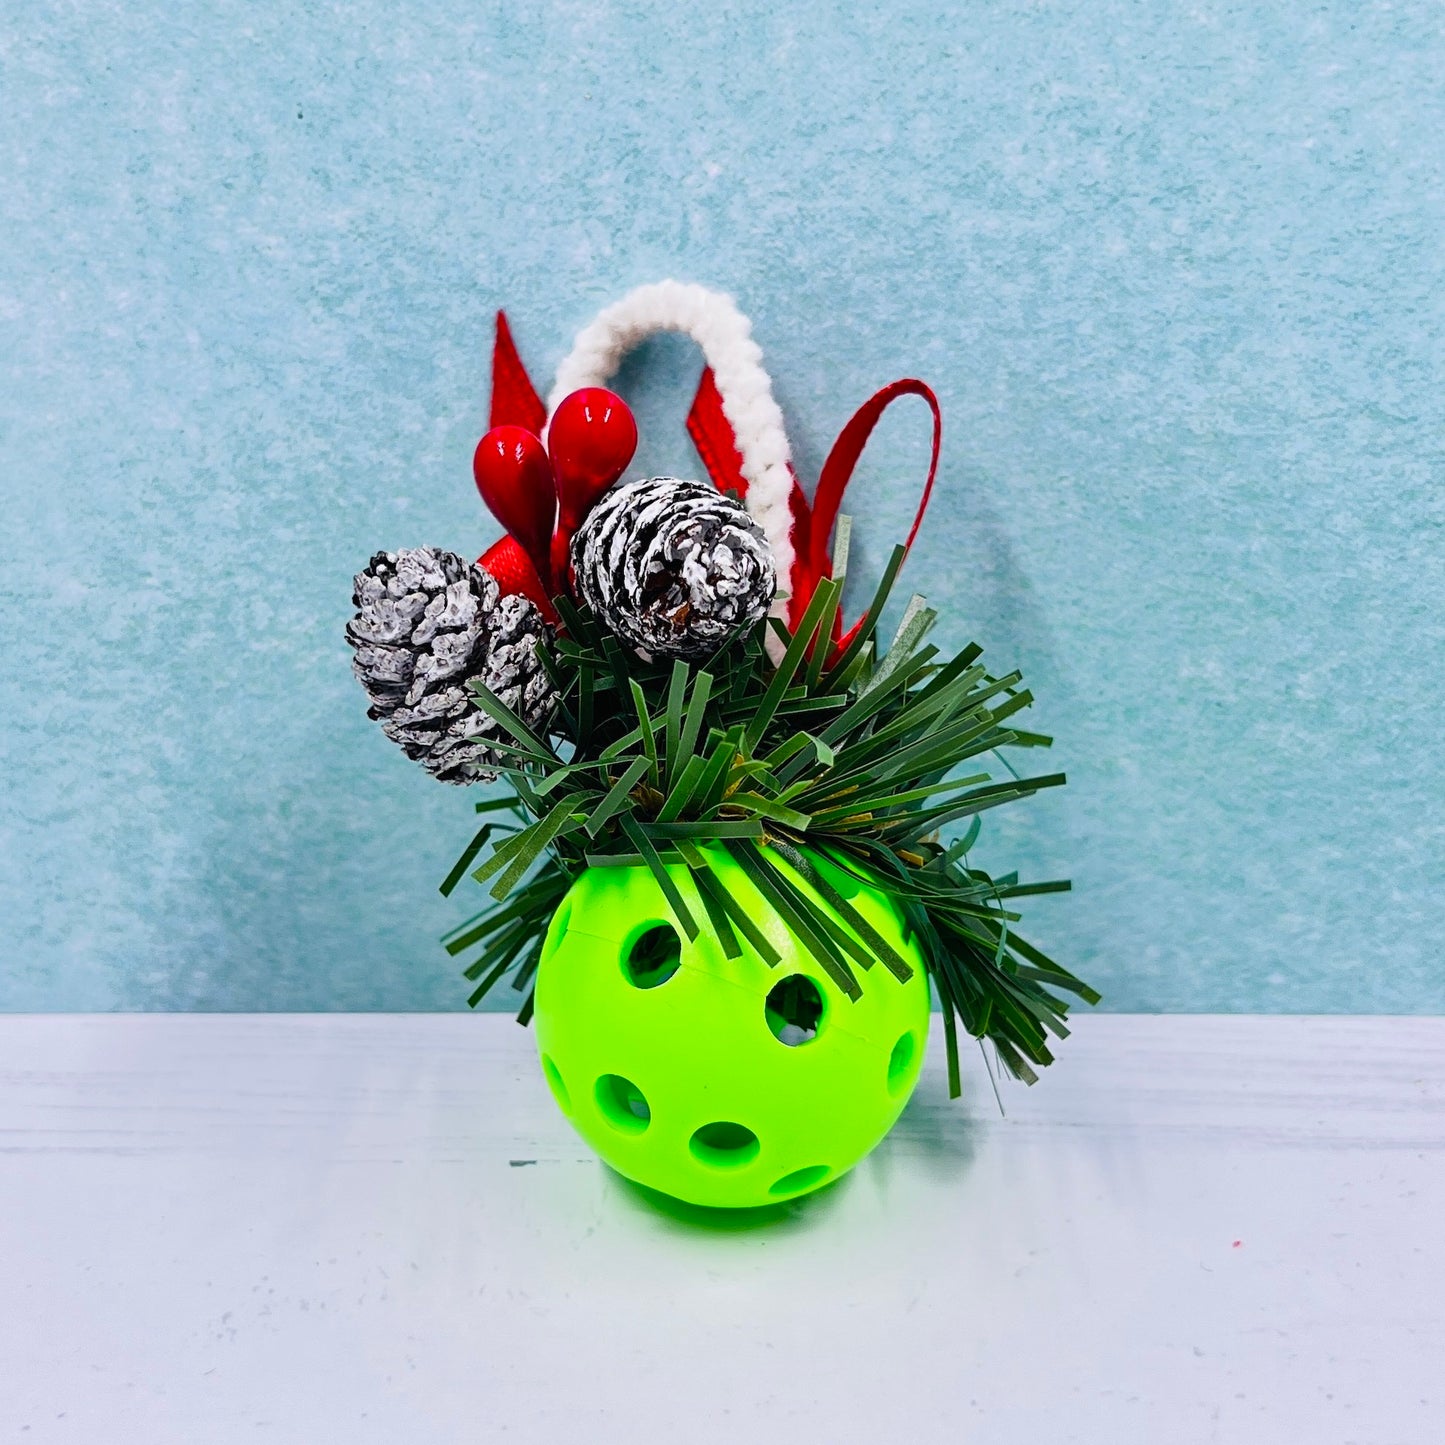 Pickleball Mistletoe  Each order gets you one mistletoe. Pickleball Christmas all year! Perfect as a gift for yourself or others. It takes up very little space for all the RV pickleballers out there. This pickleball mistletoe can be hung in the doorway or used as a Christmas tree ornament. The pickleball are adorned with plastic sprigs of holly and berries, hung with decorative ribbon and come in three sizes and many colors